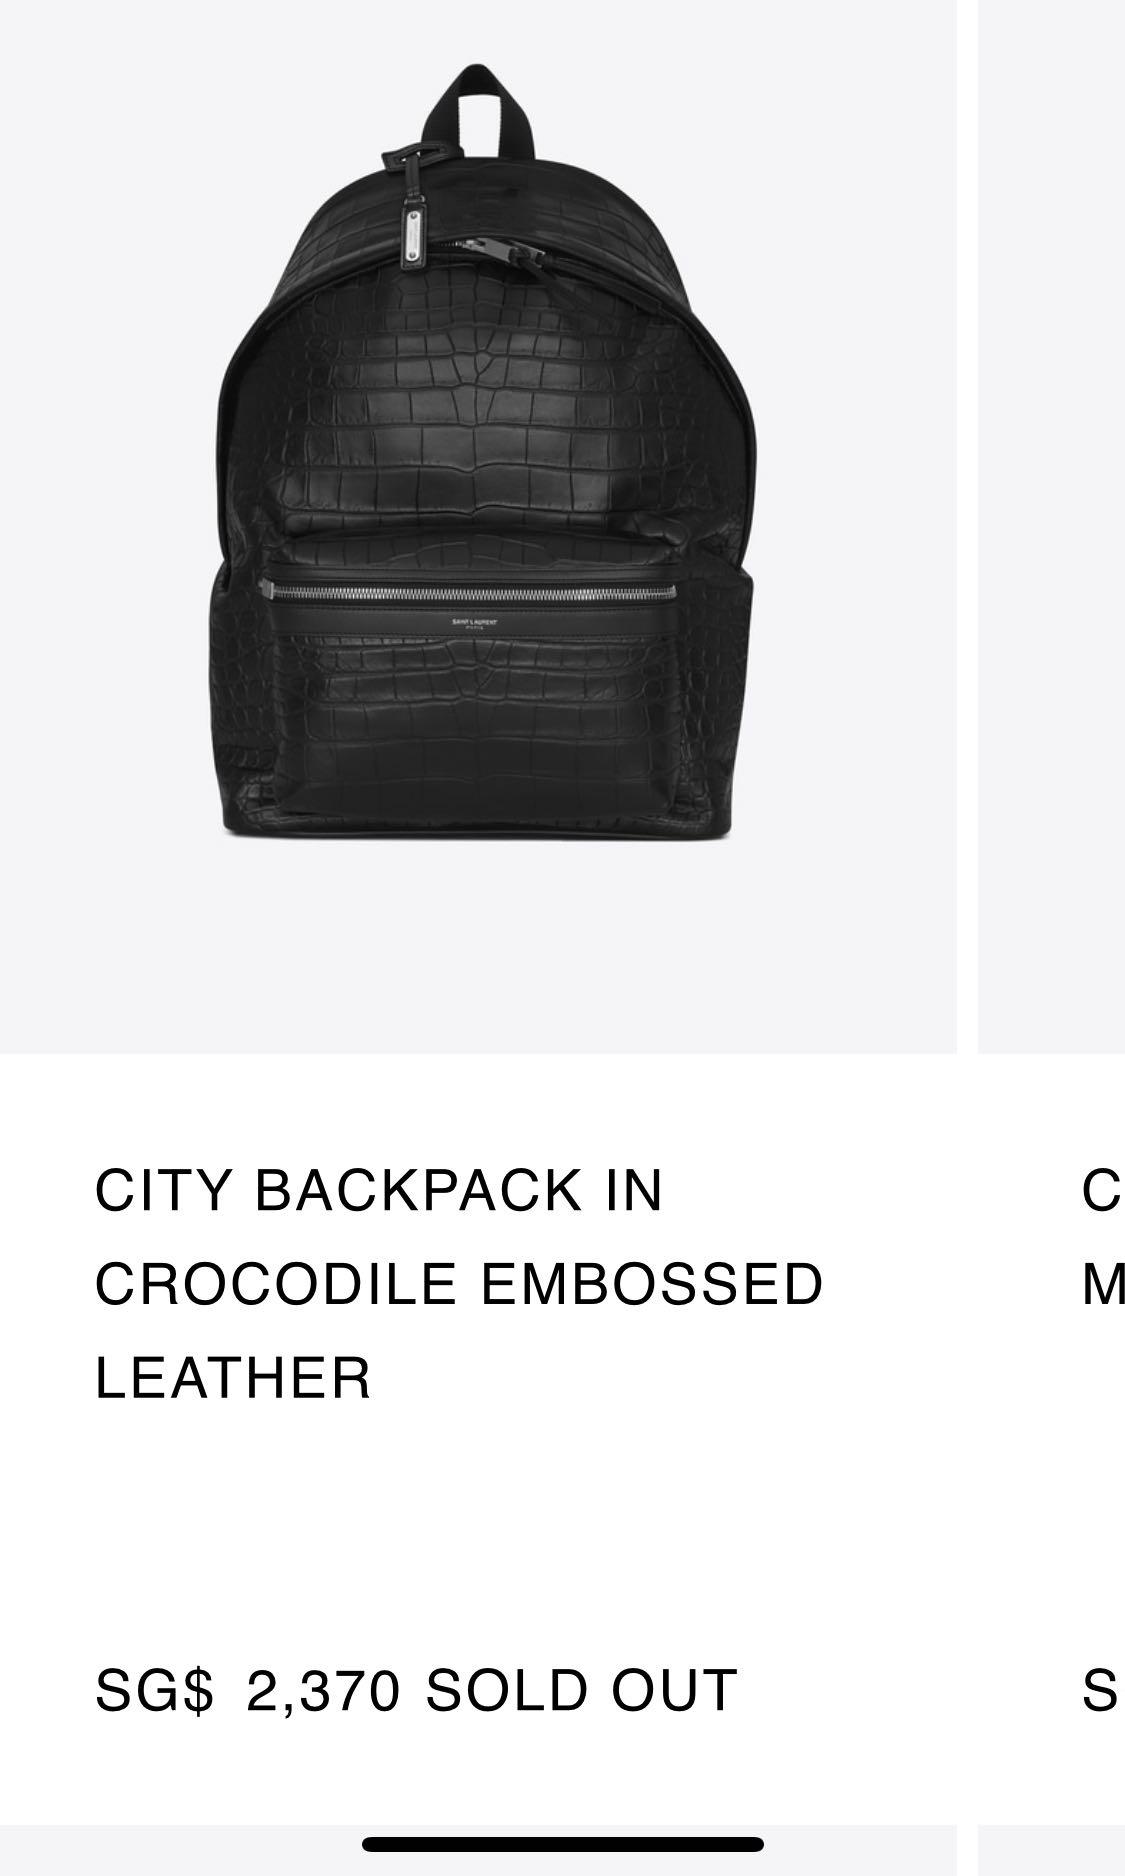 Louis Vuitton Introduces Crocodile Leather Backpack at $79K